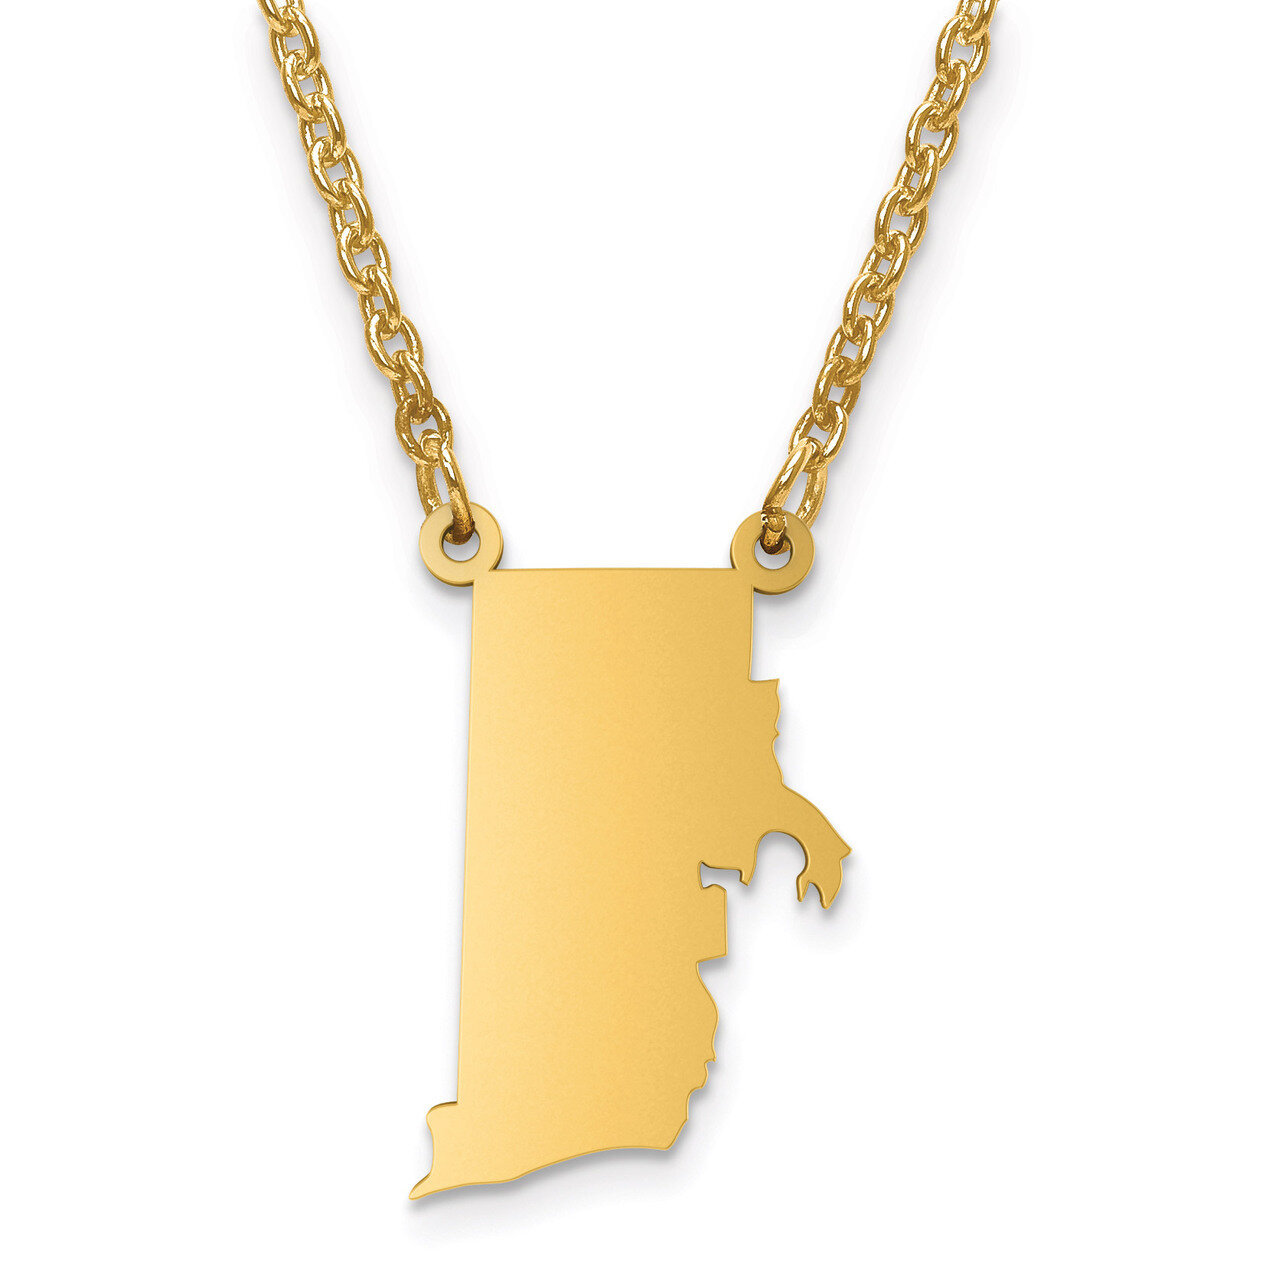 Rhode Island State Pendant with Chain Engravable Gold-plated on Sterling Silver